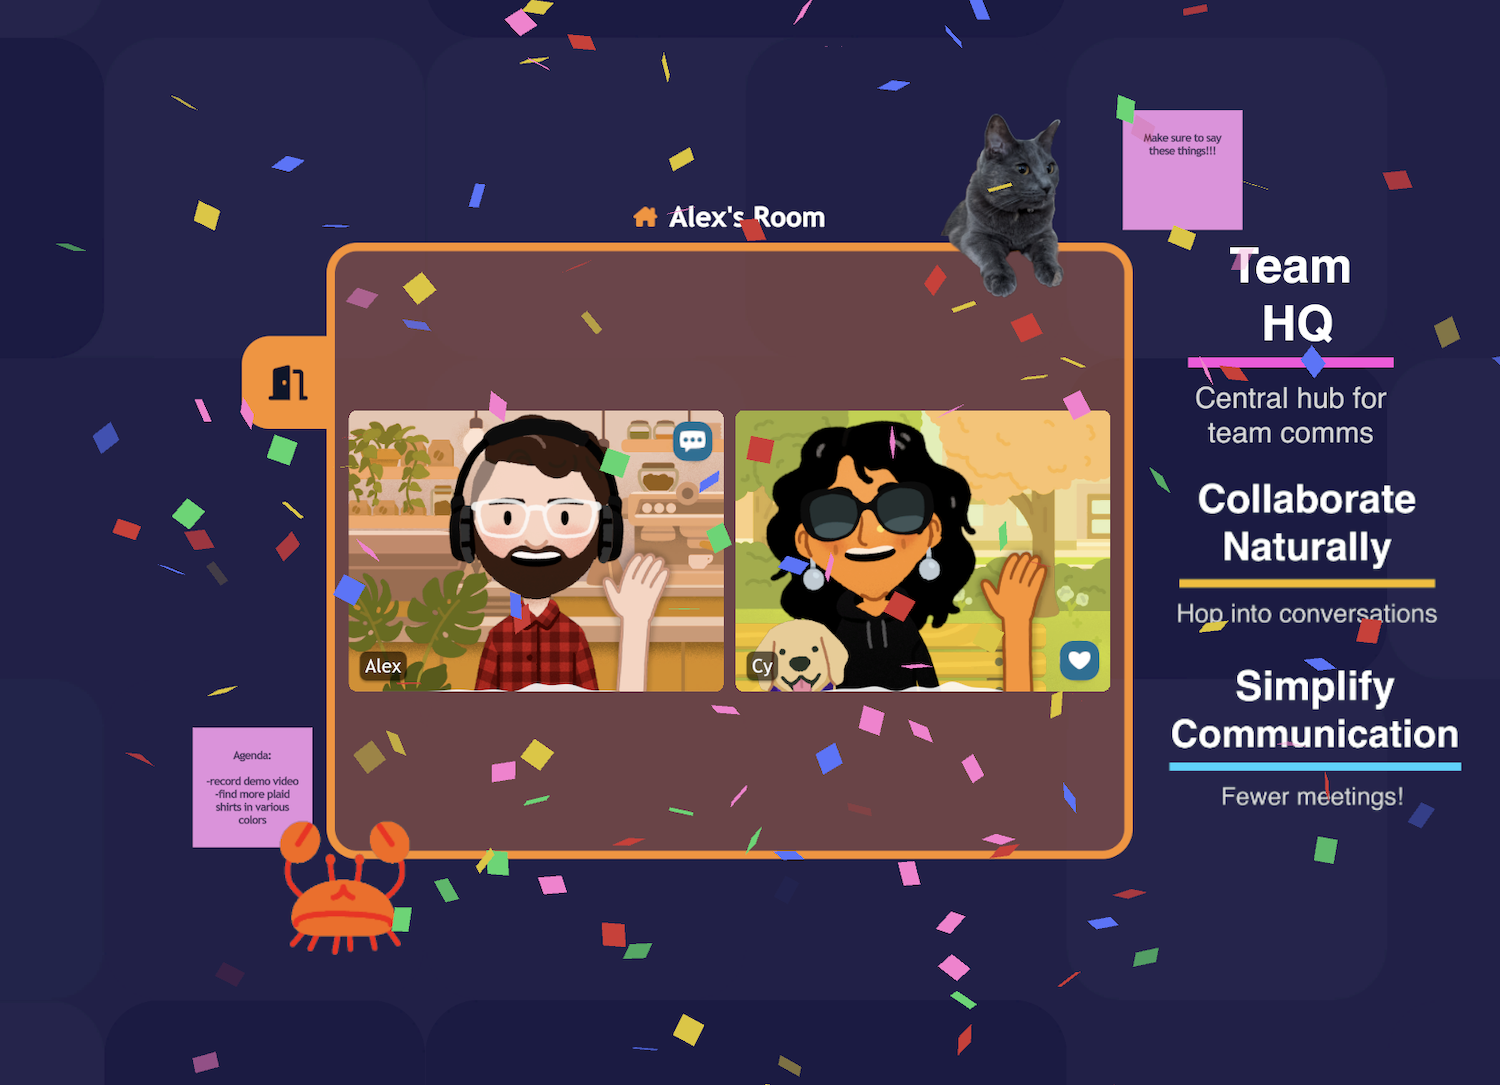 This screenshot of the Tangle app shows the avatars of co-founders Alex Schwartz and Cy Wise .